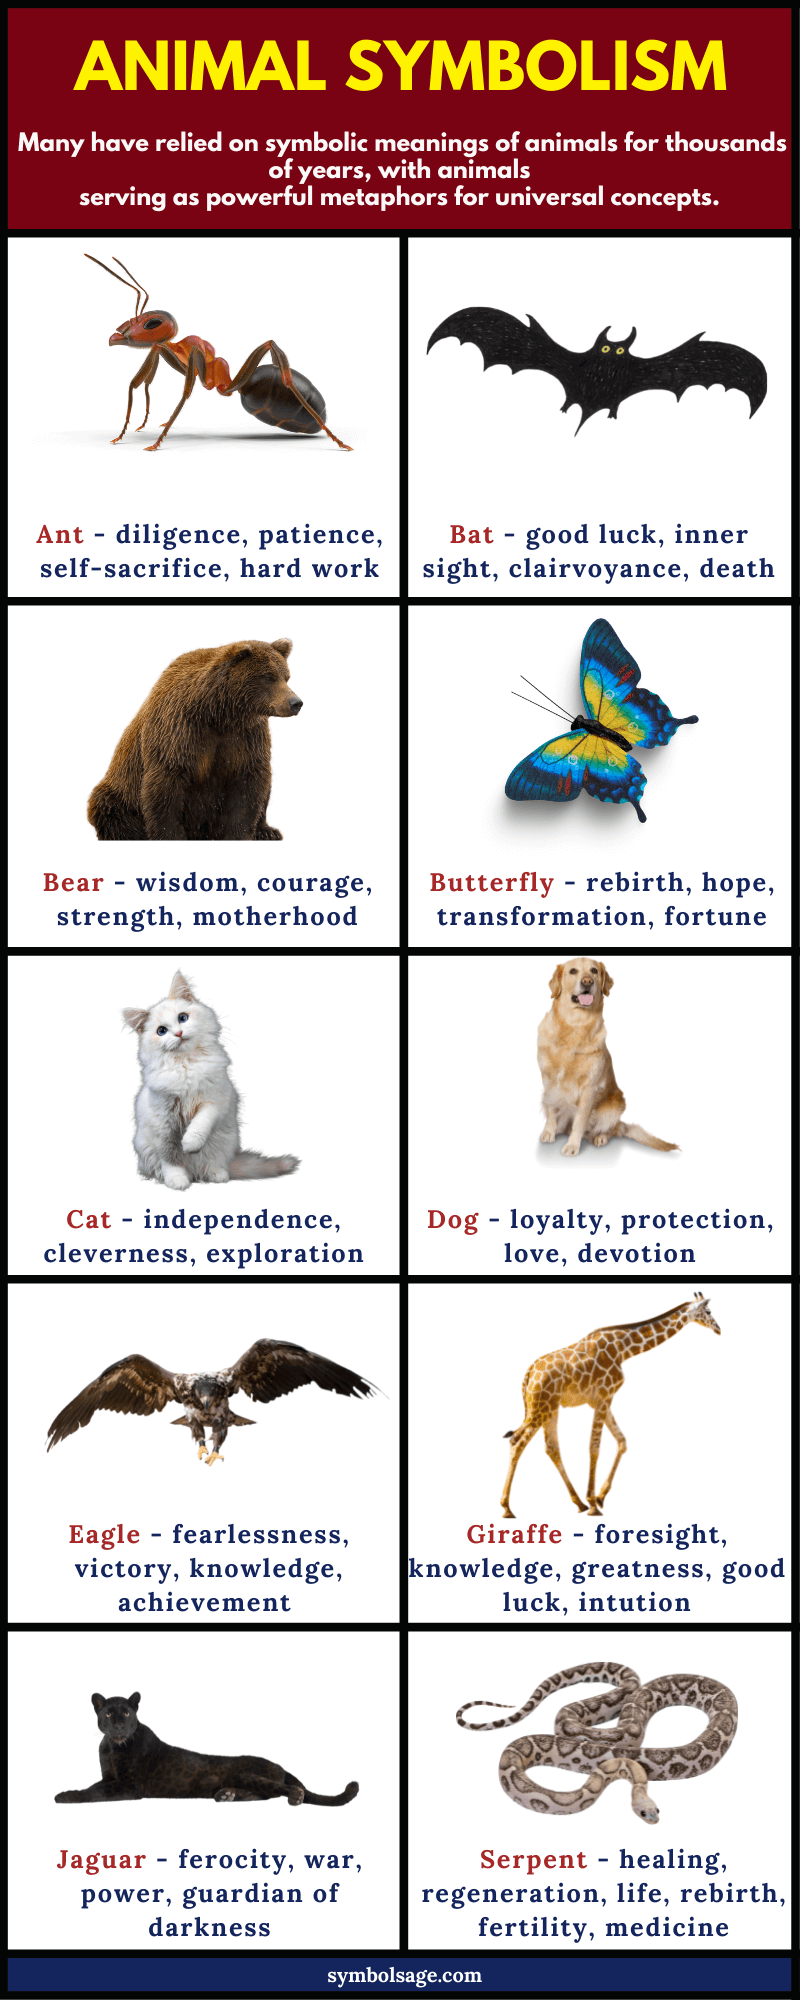 What animals symbolize peace and hope?